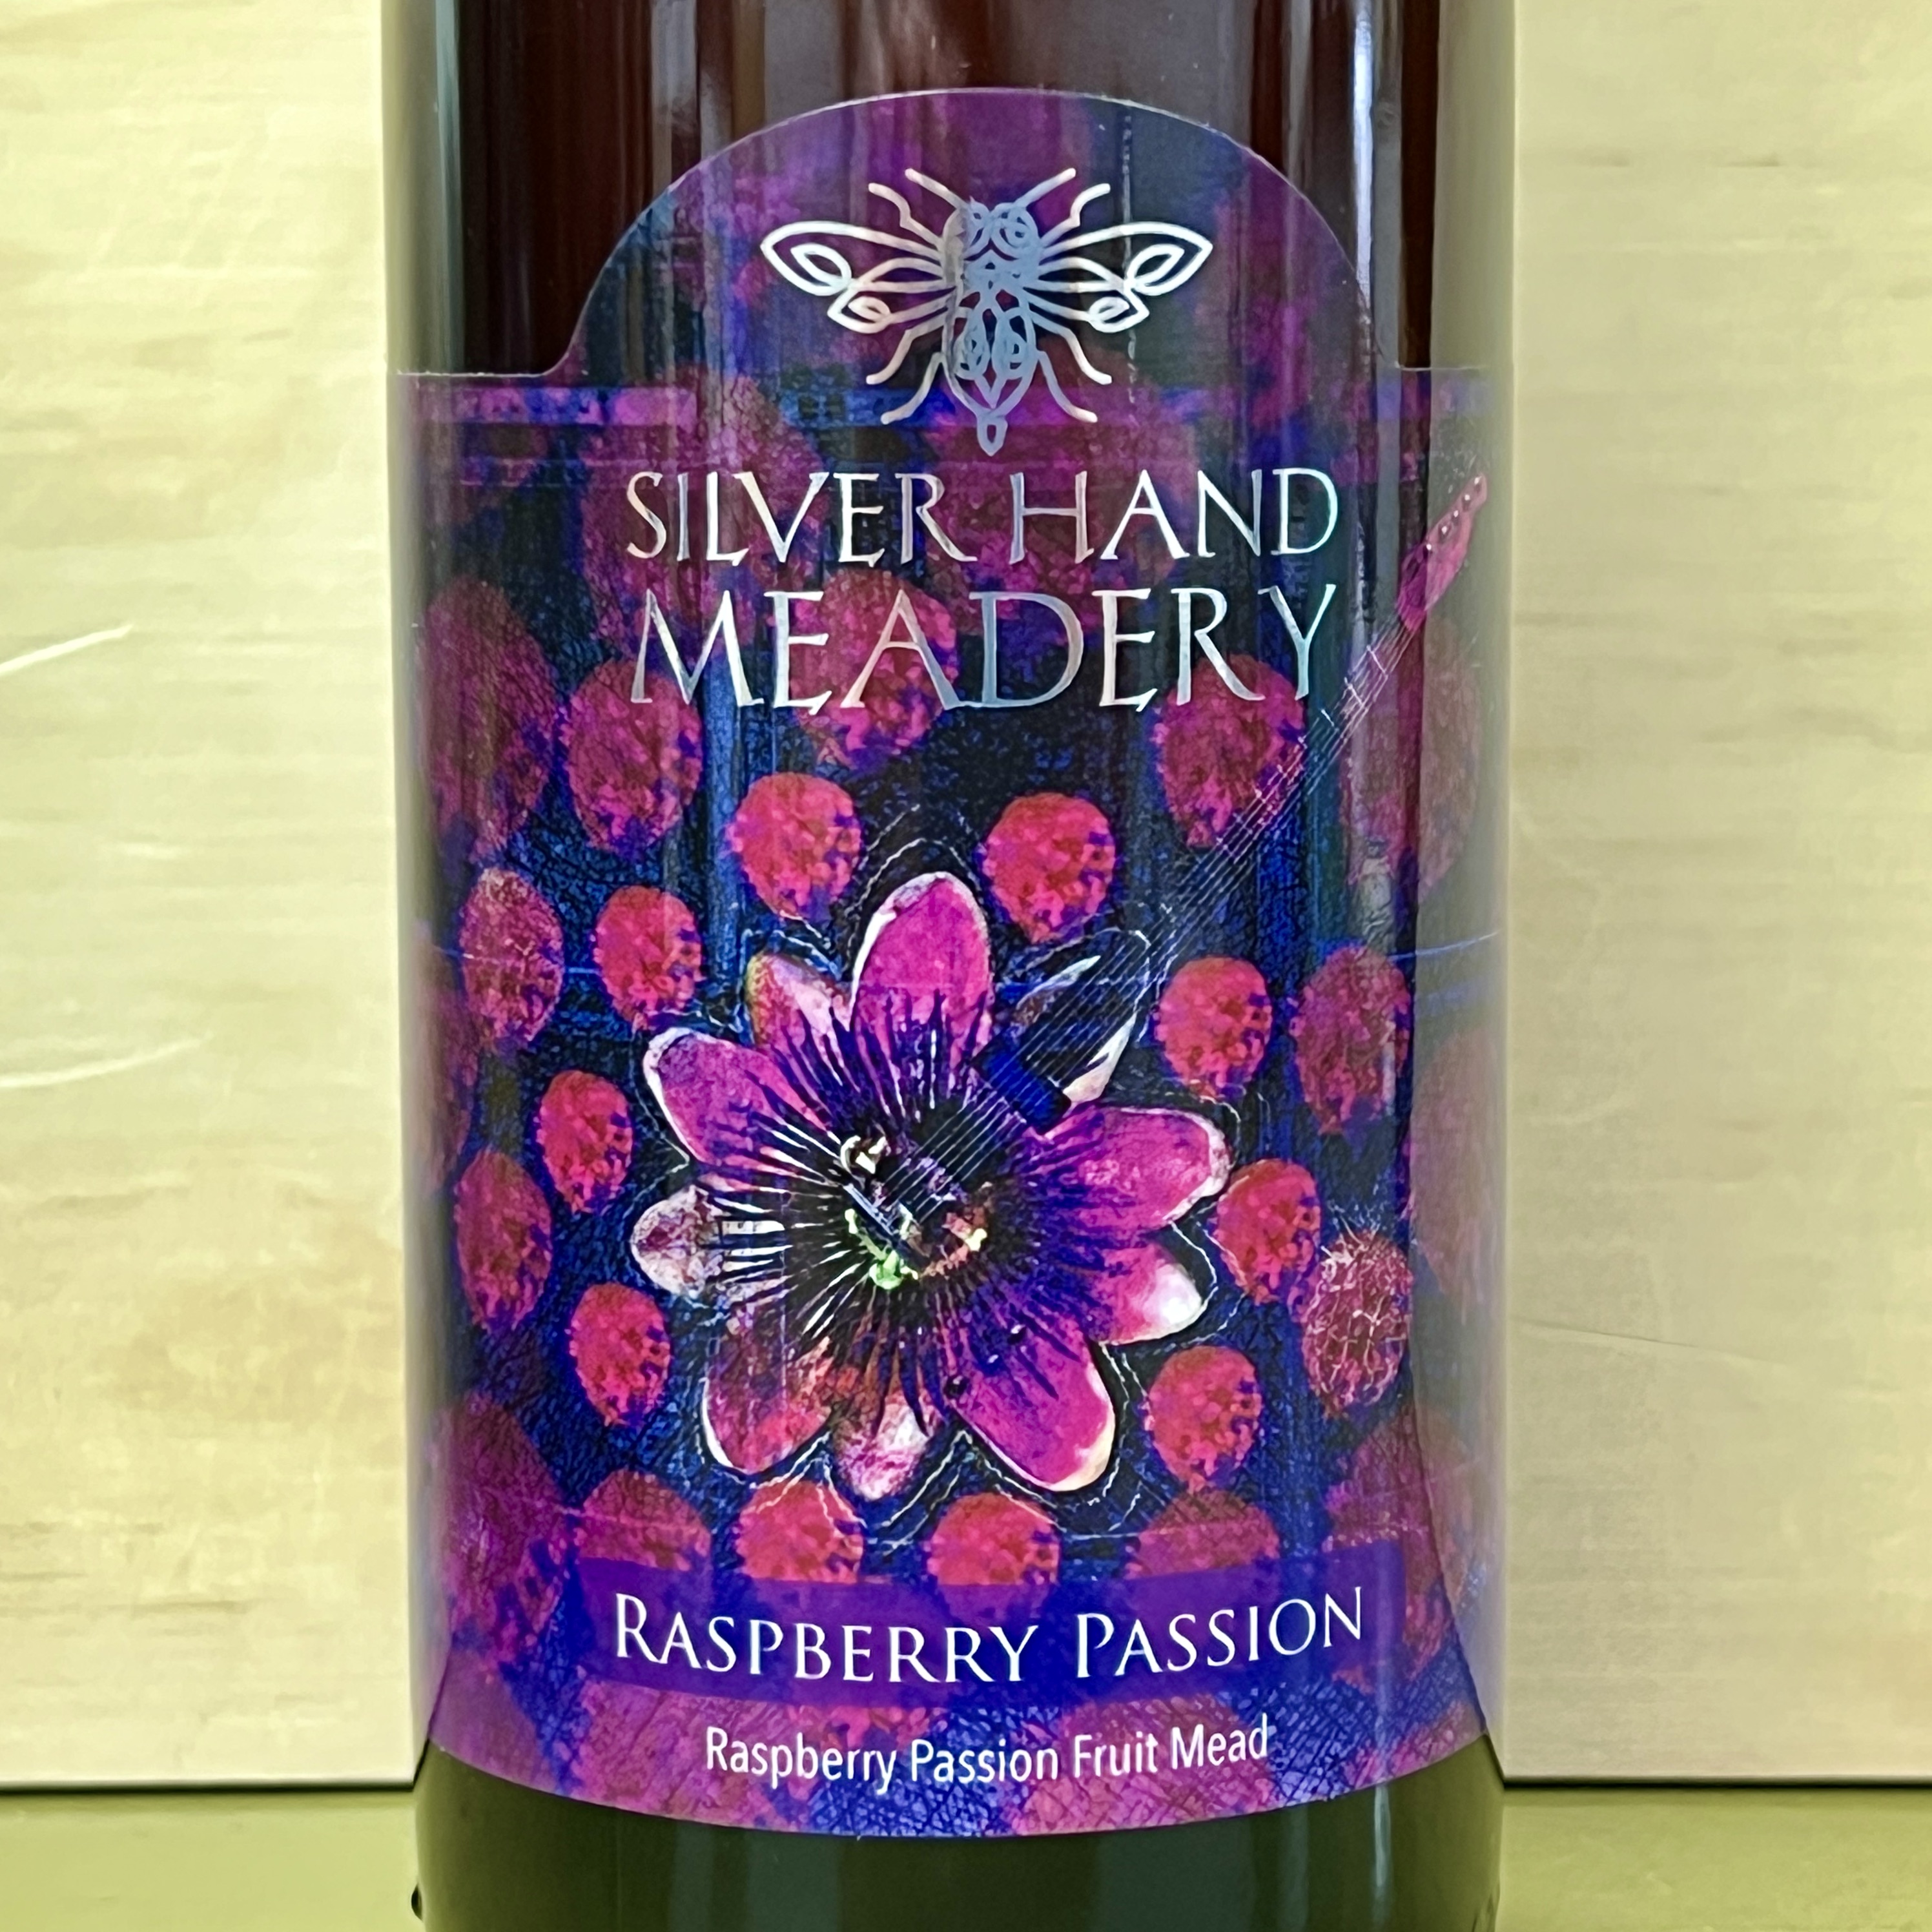 Silver Hand Meadery Raspberry Passion Mead 500ml